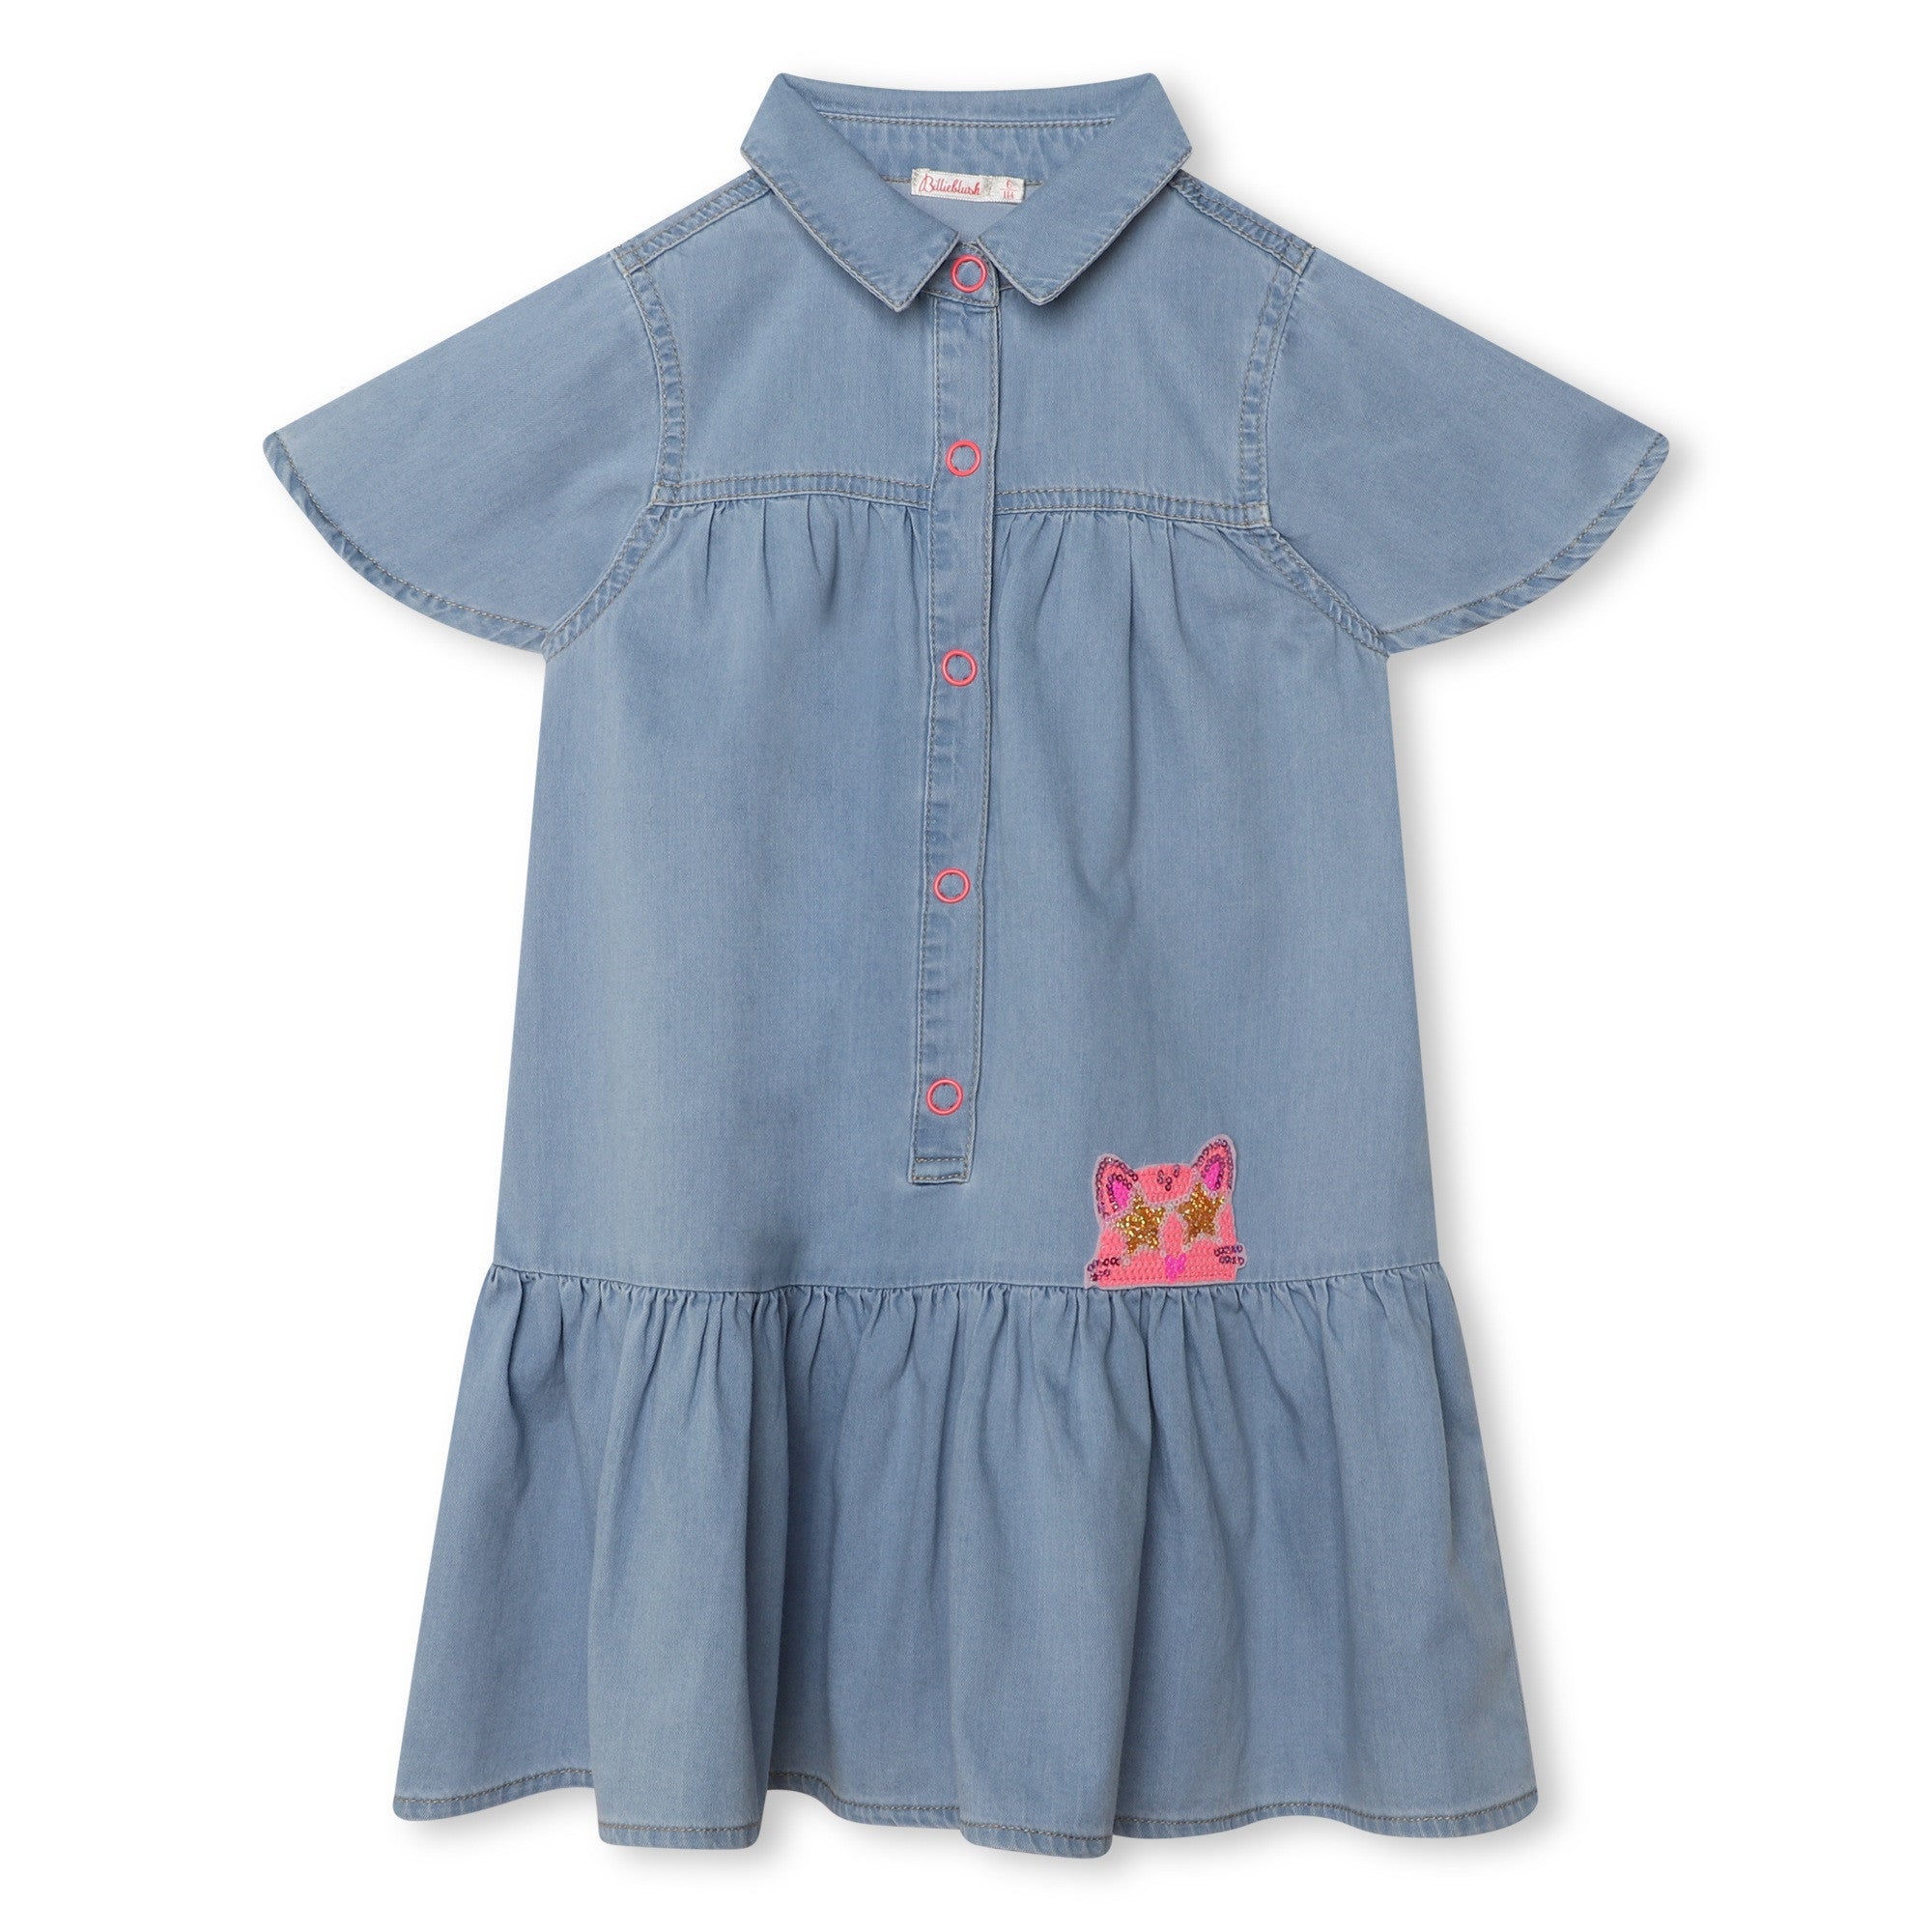 Guess Kids Girls Red Floral Denim Dress Size 4 years (s)